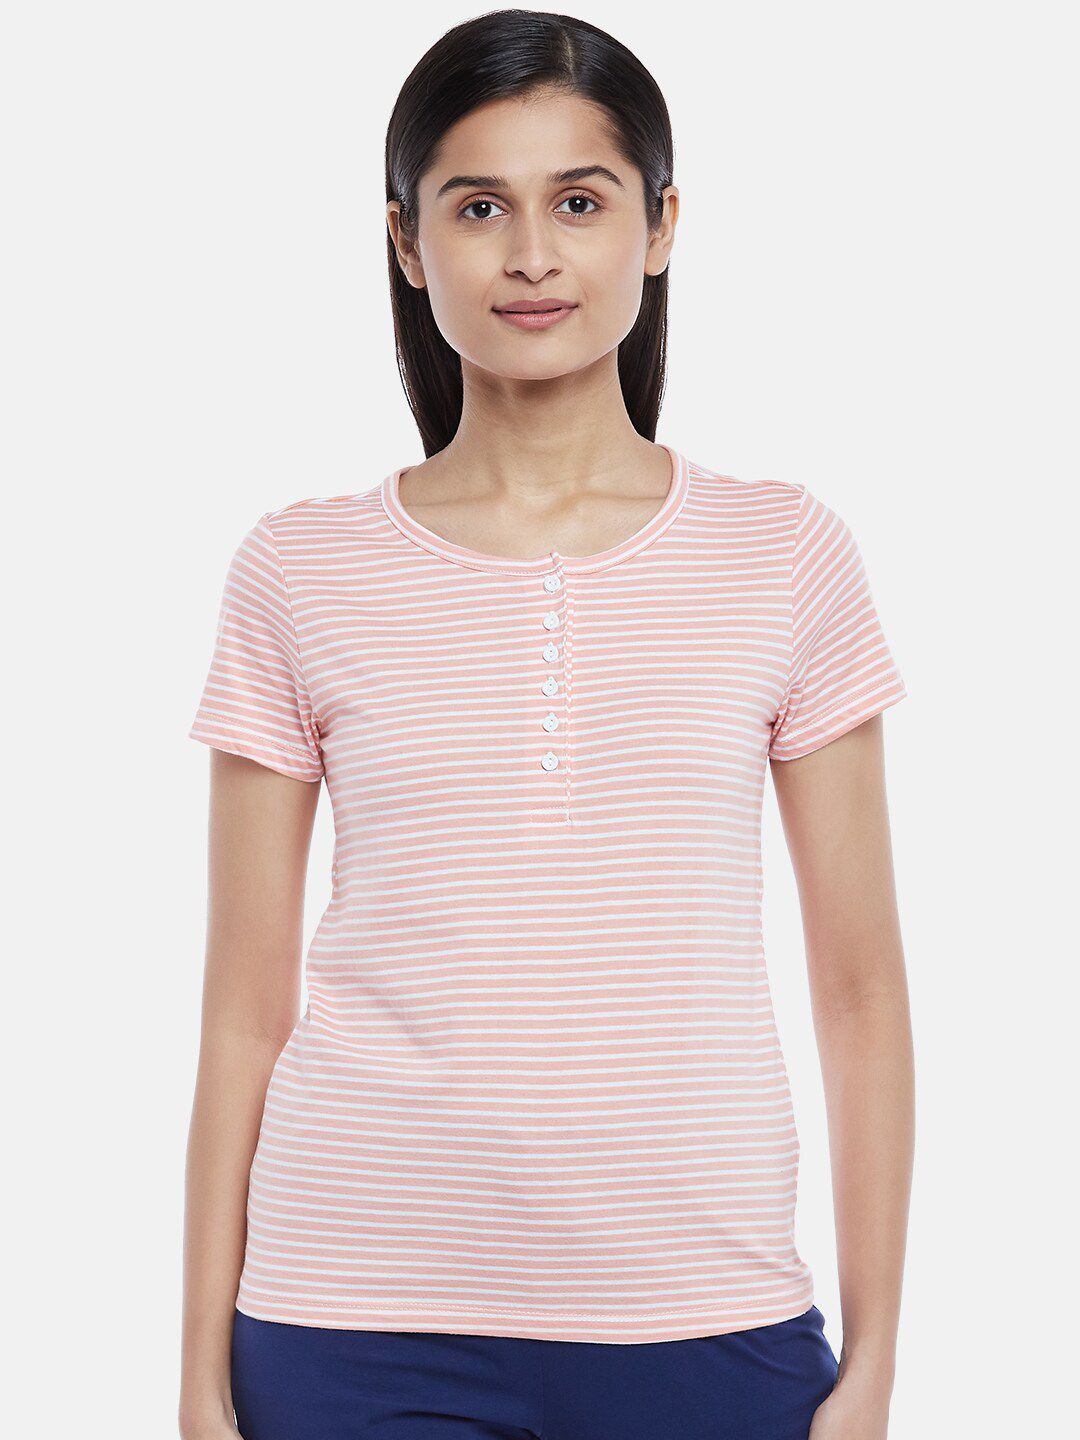 Dreamz by Pantaloons Peach-Coloured & White Striped Pure Cotton Lounge tshirt Price in India